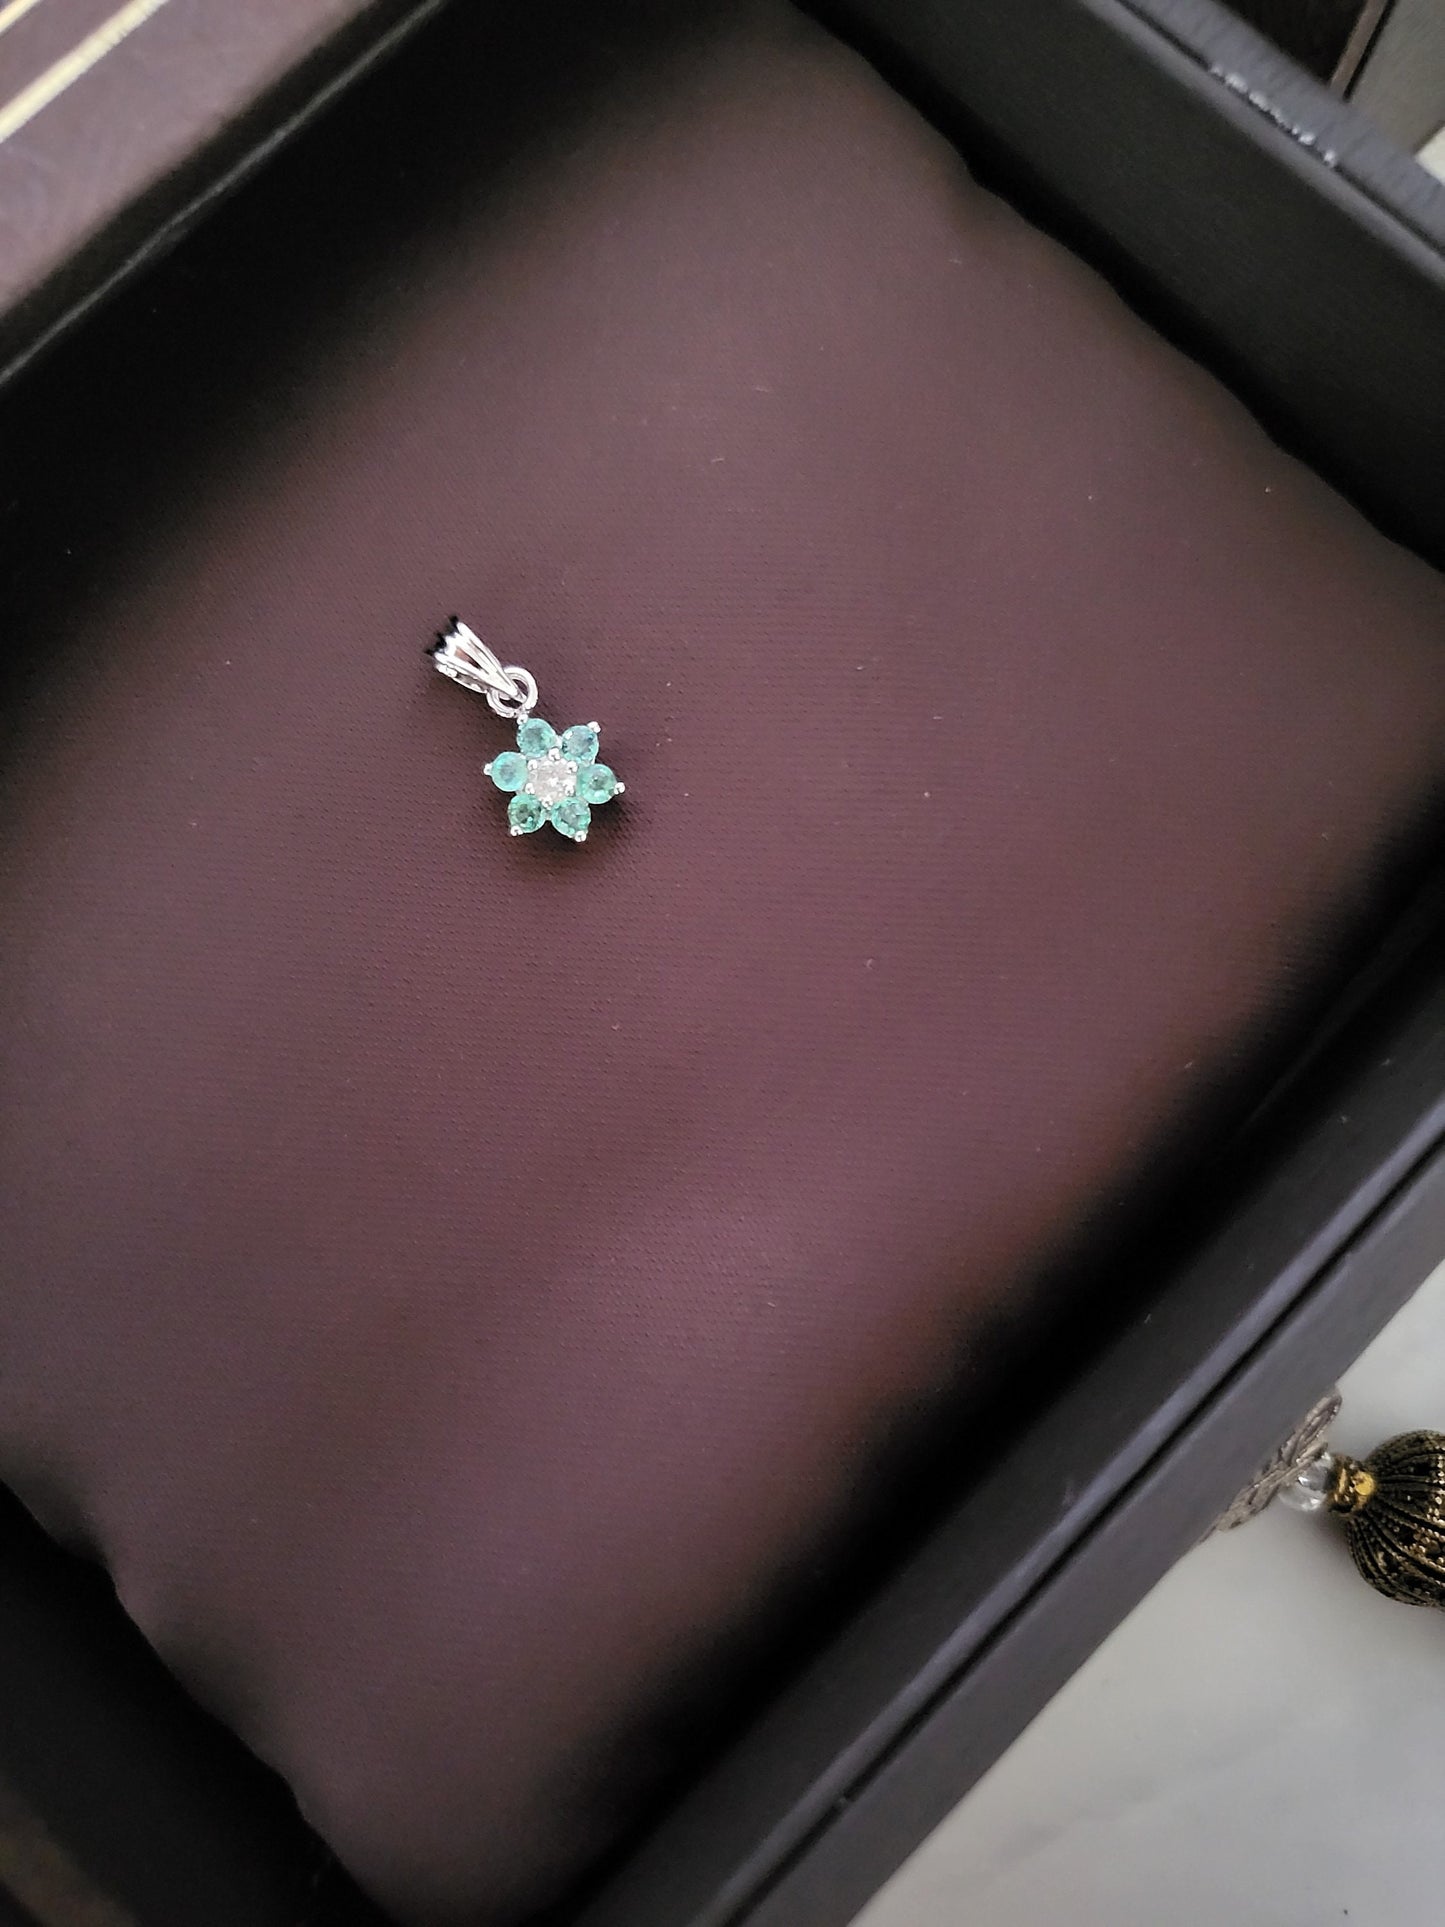 Natural Emerald 9K Solid White Gold with Diamond Translucent Dainty Flower Star Shape Authentic Pendant